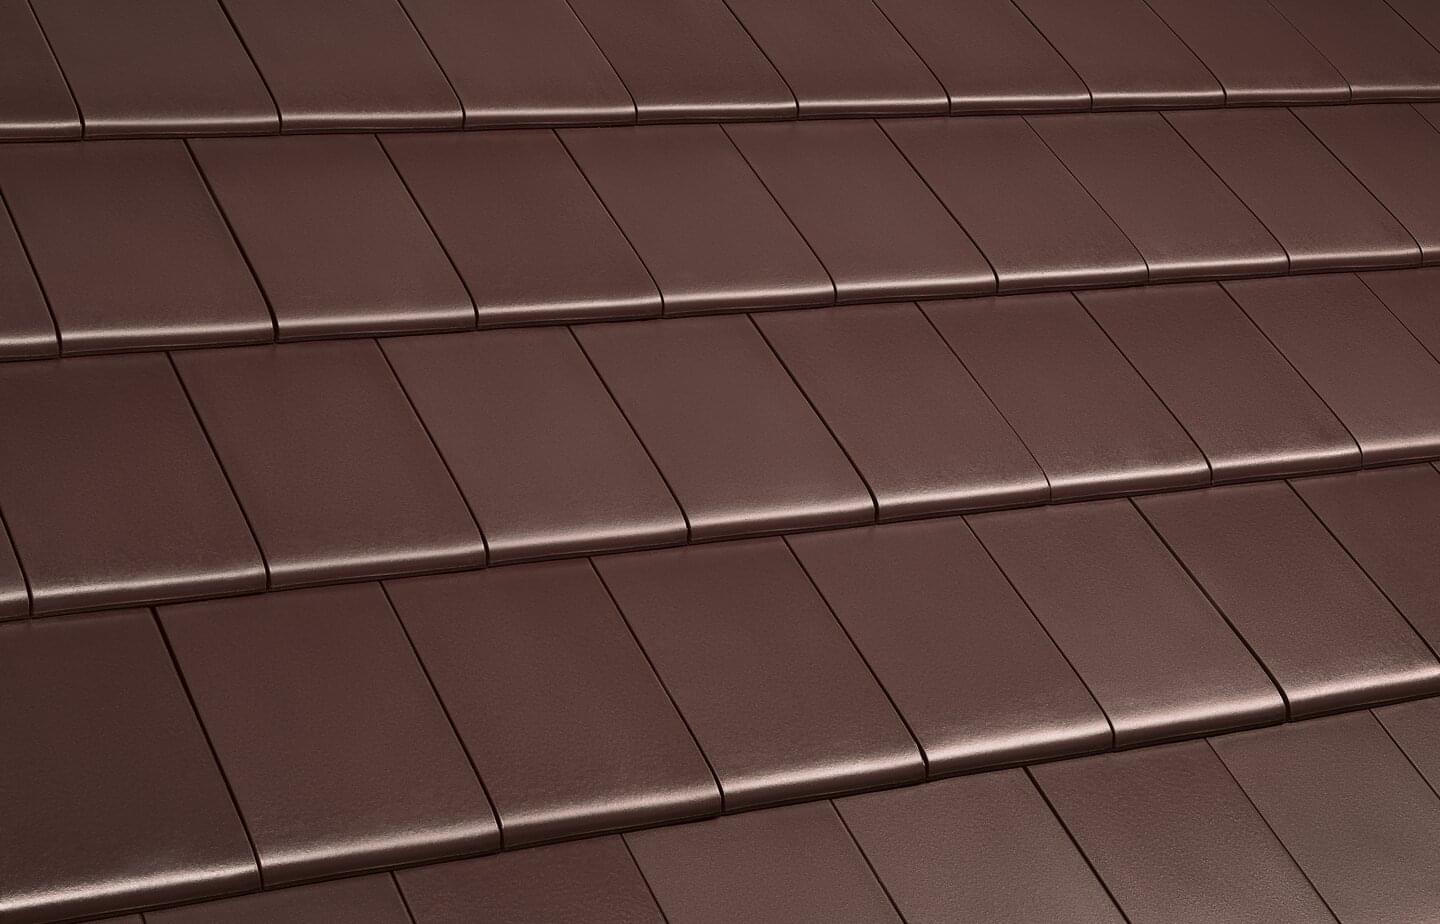 Linea® - Sinter brown | Image roof surface | © © ERLUS AG 2021